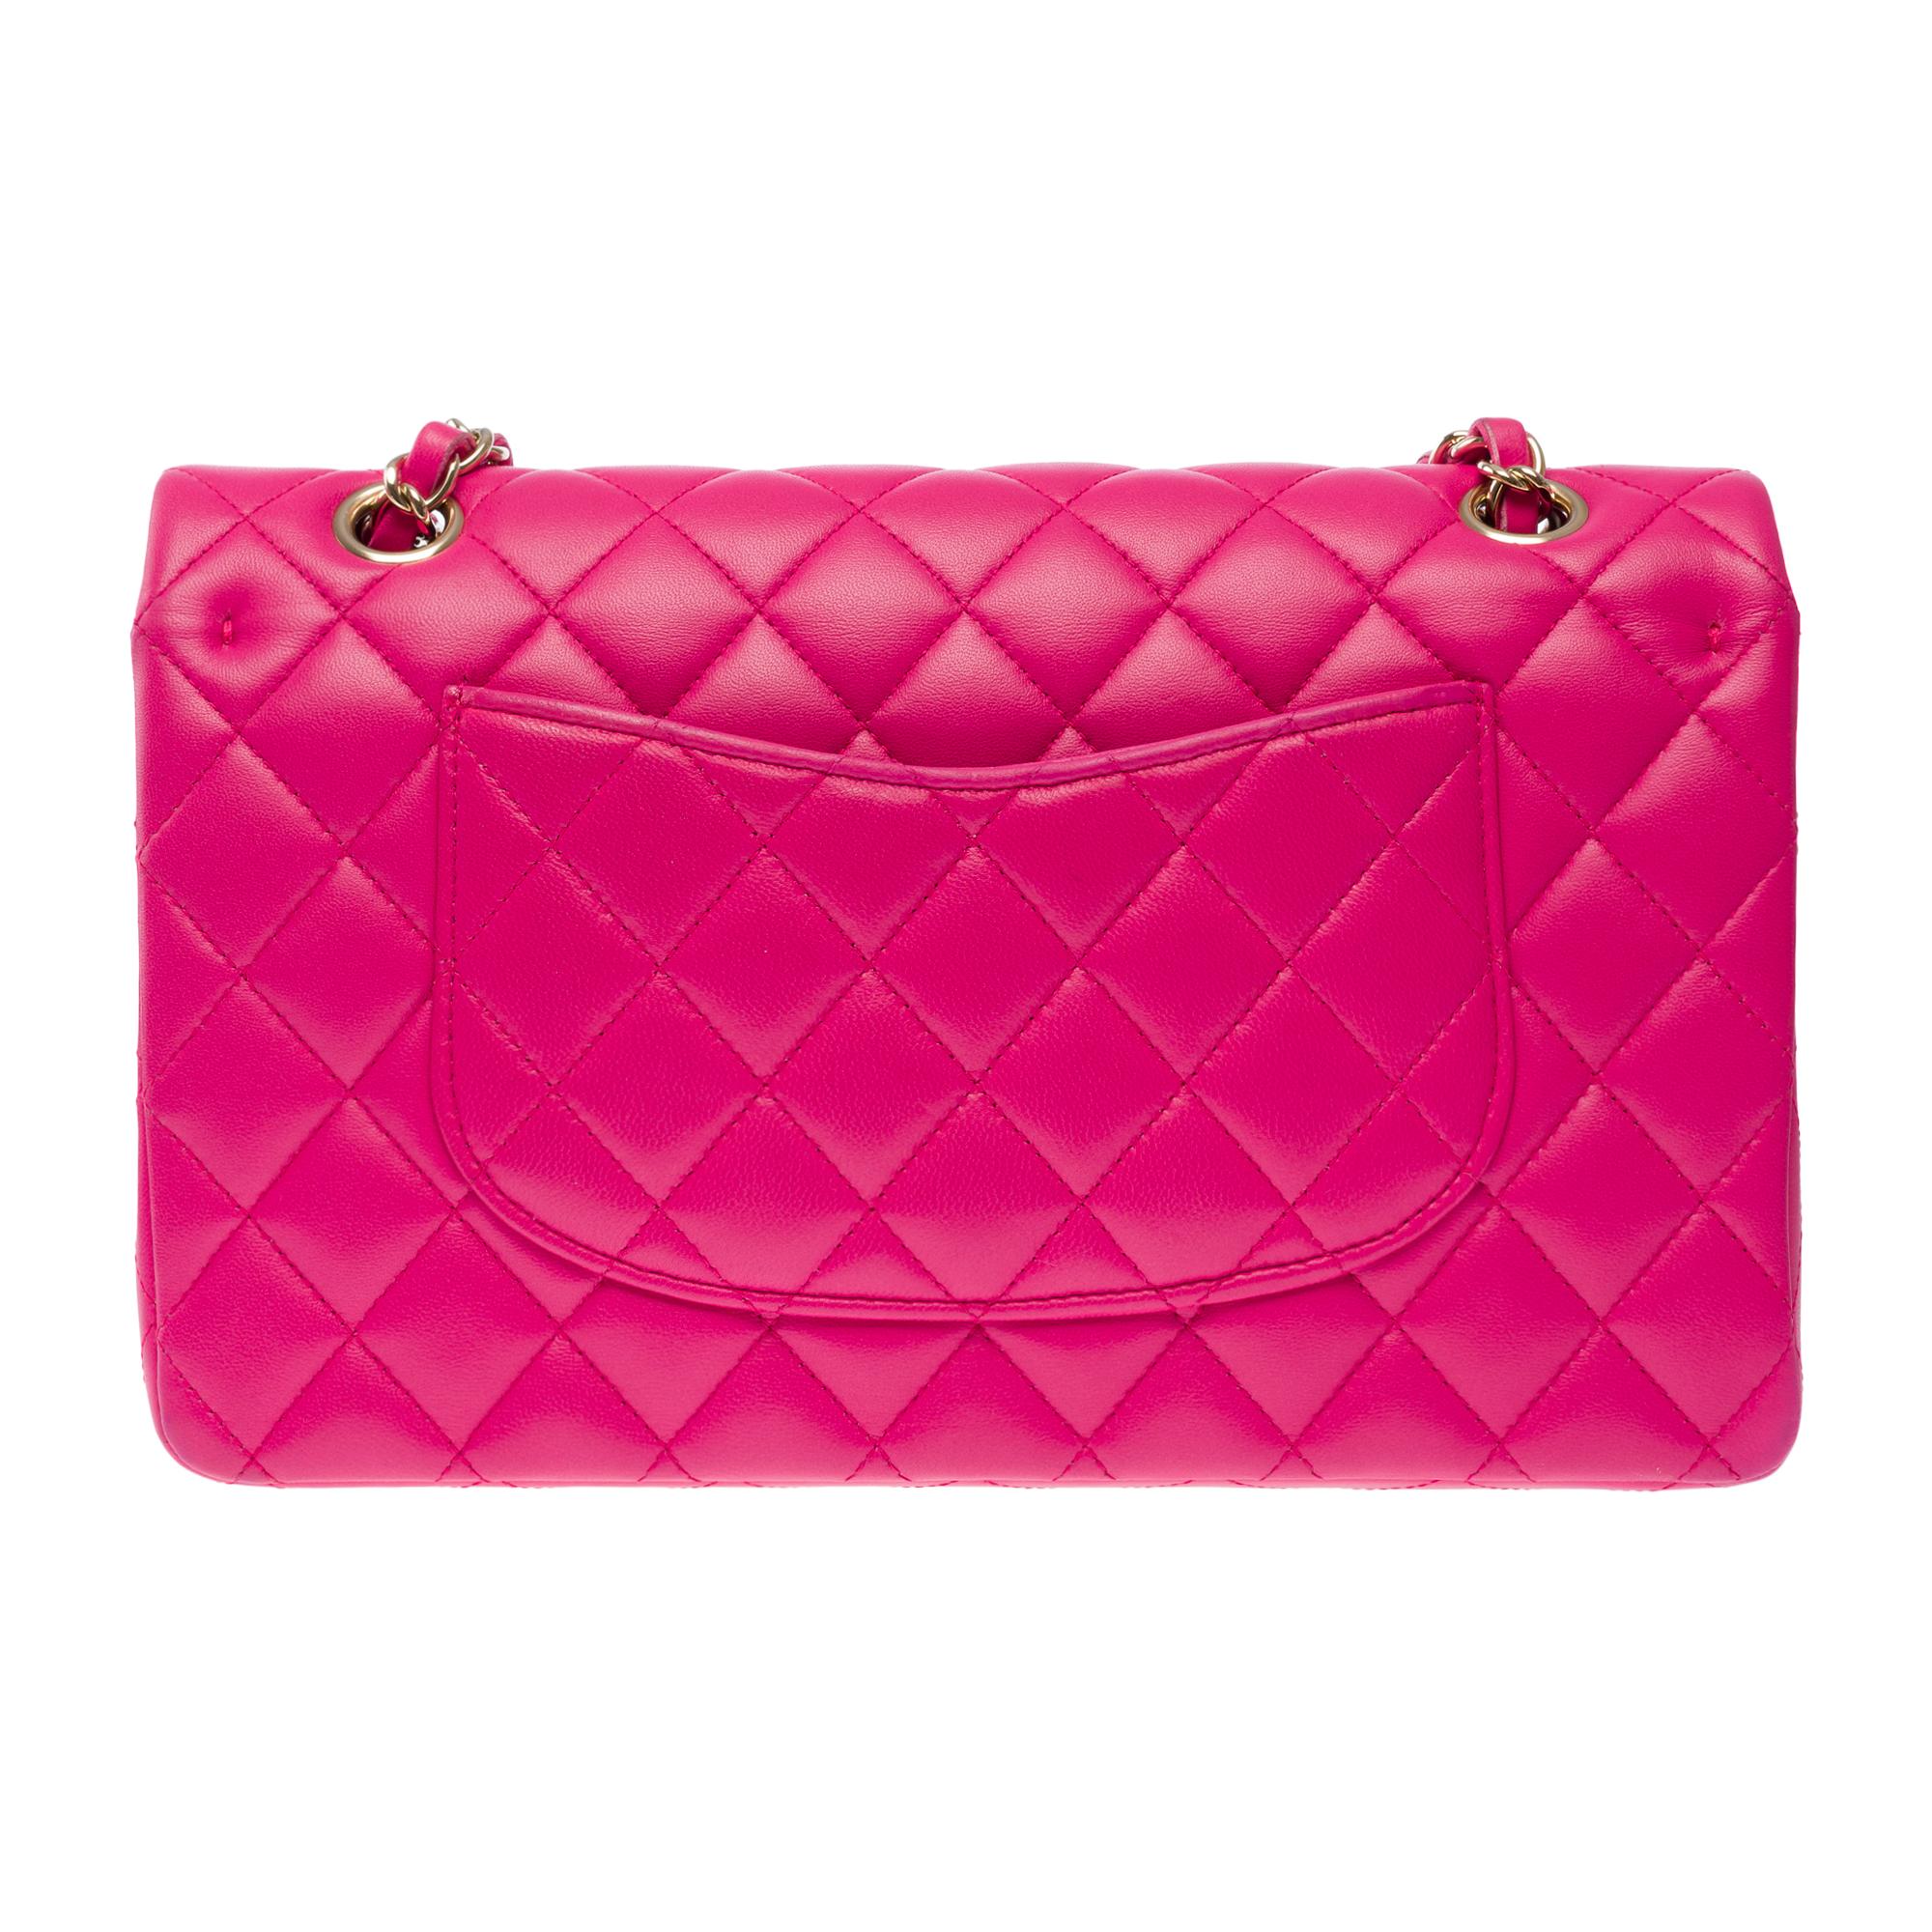 Women's Chanel Timeless double flap shoulder bag in Pink quilted lambskin leather, CHW